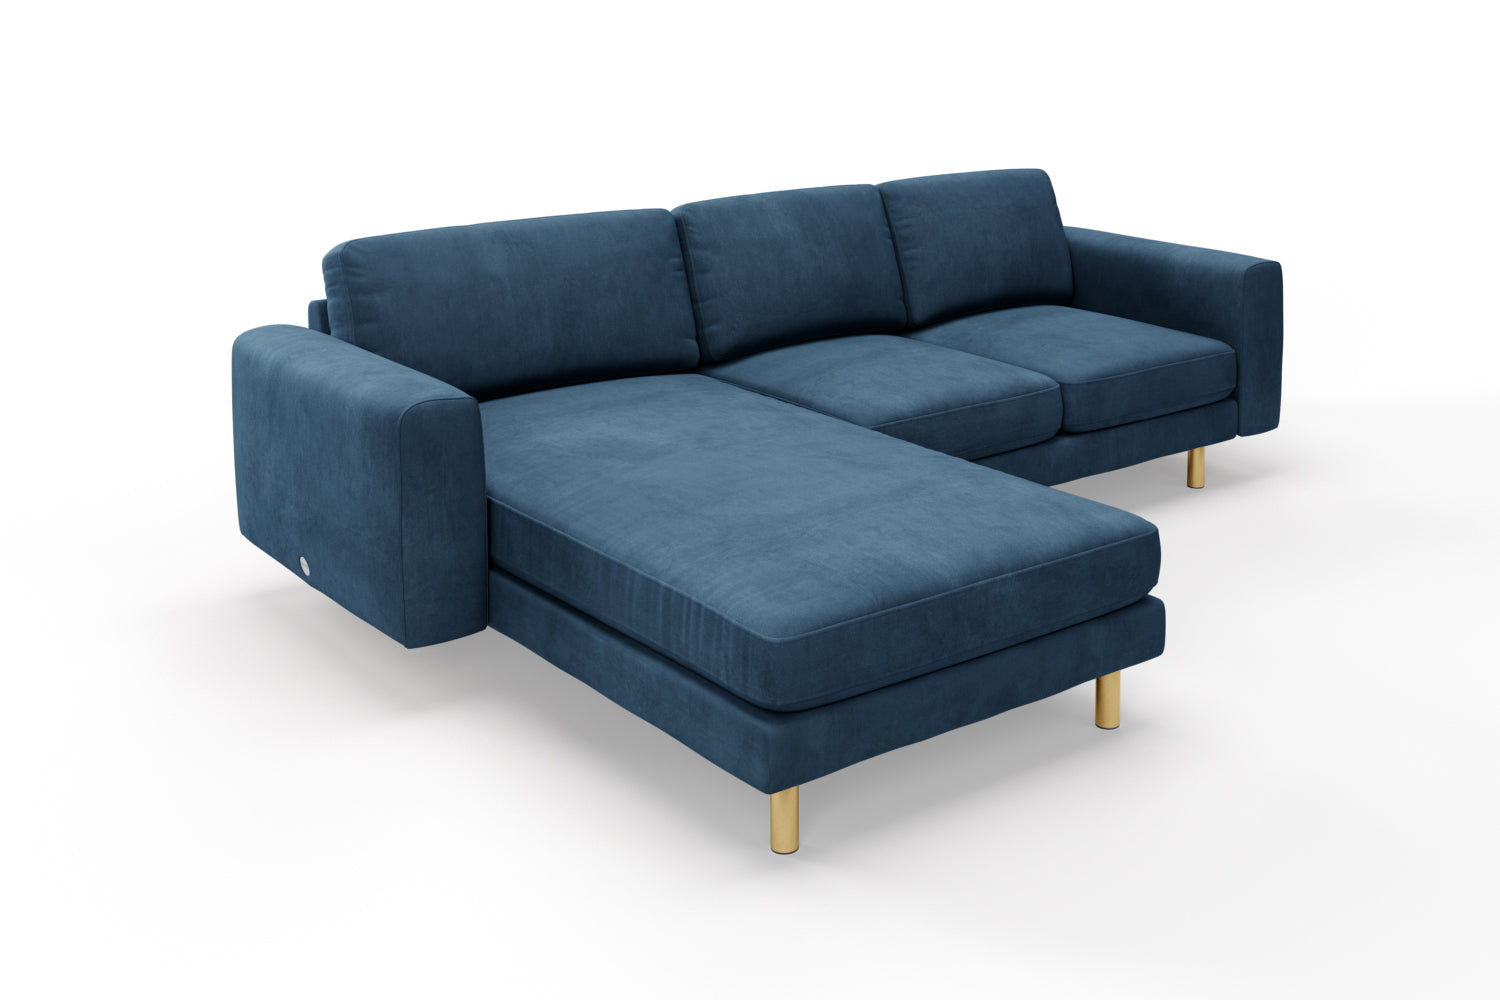 SNUG | The Big Chill Left Hand Chaise Sofa in Blue Steel